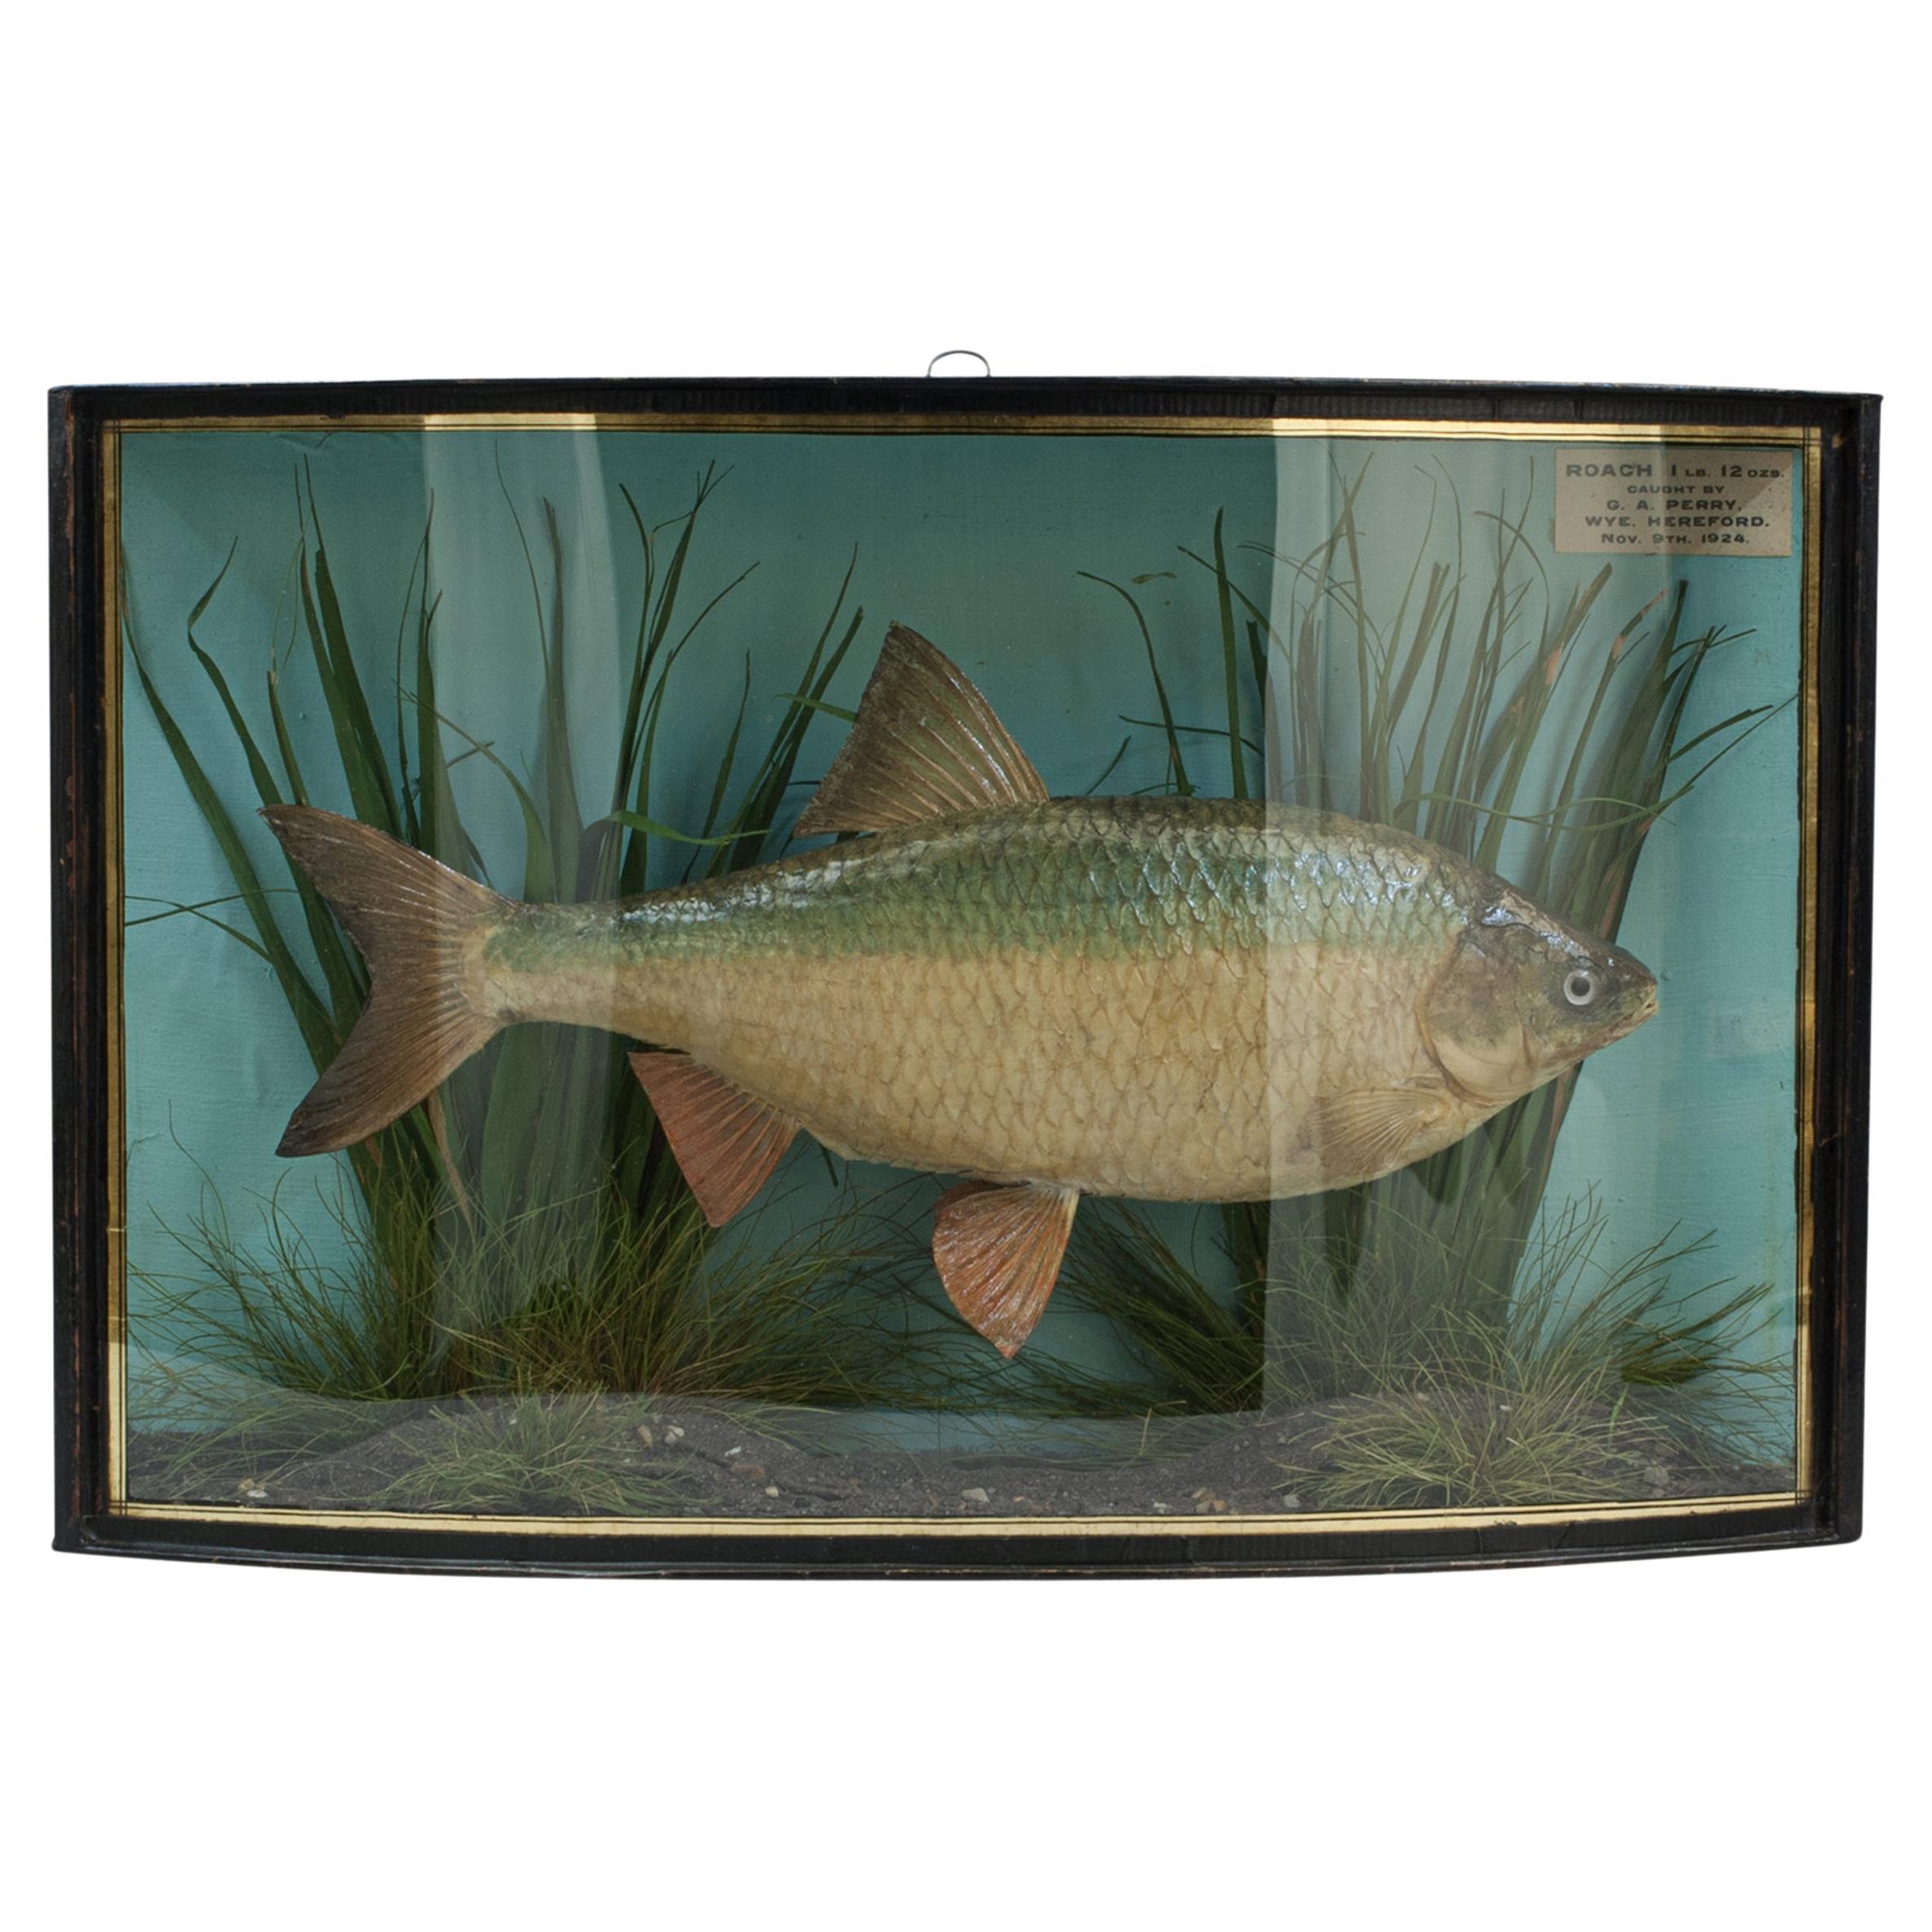 Pepared Fish in Bow Fronted Case, Roach